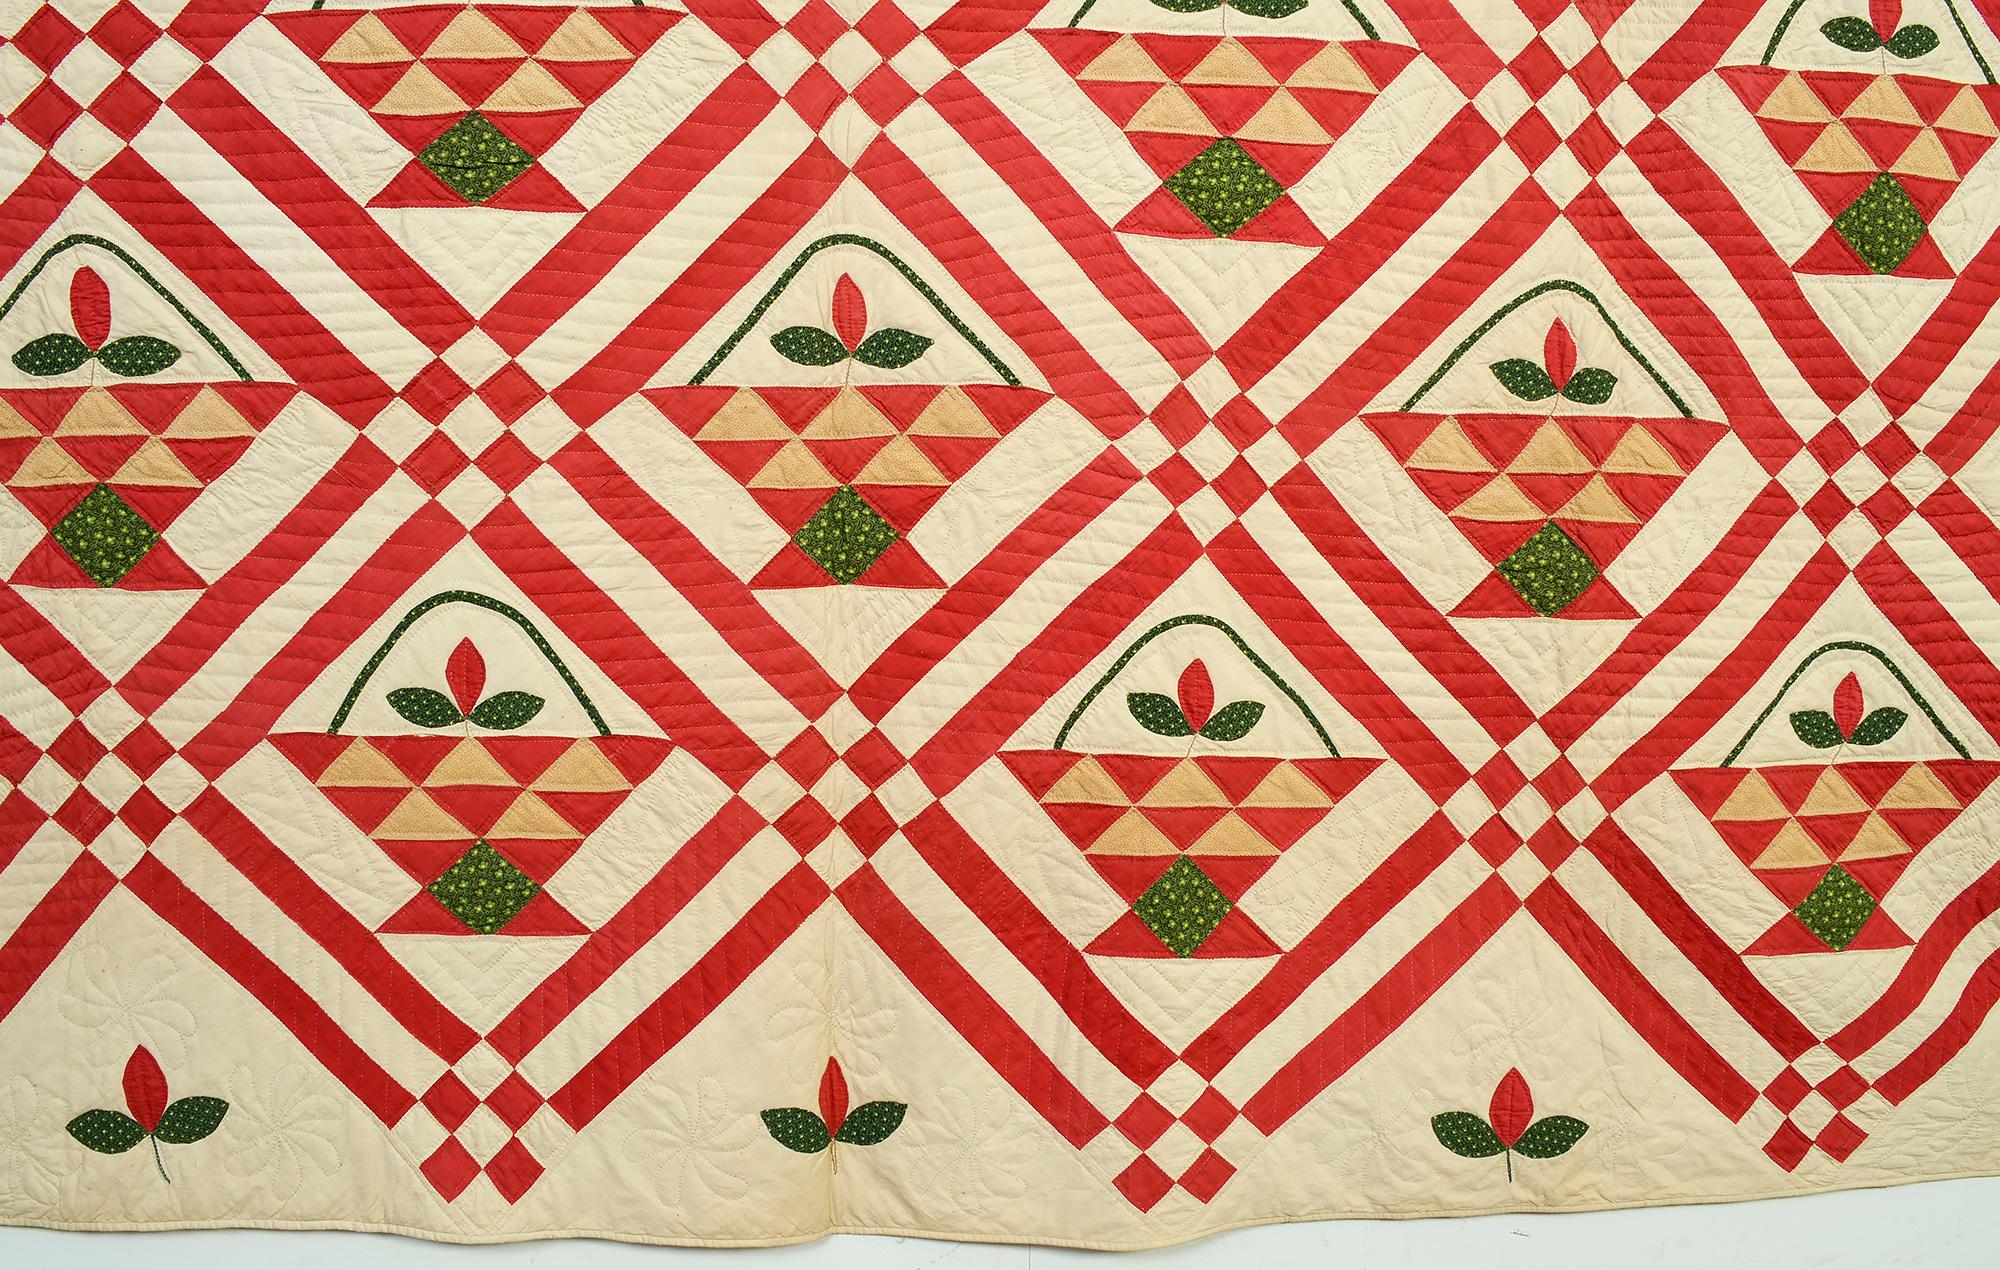 19th Century Baskets Quilt with Appliqued Flowers